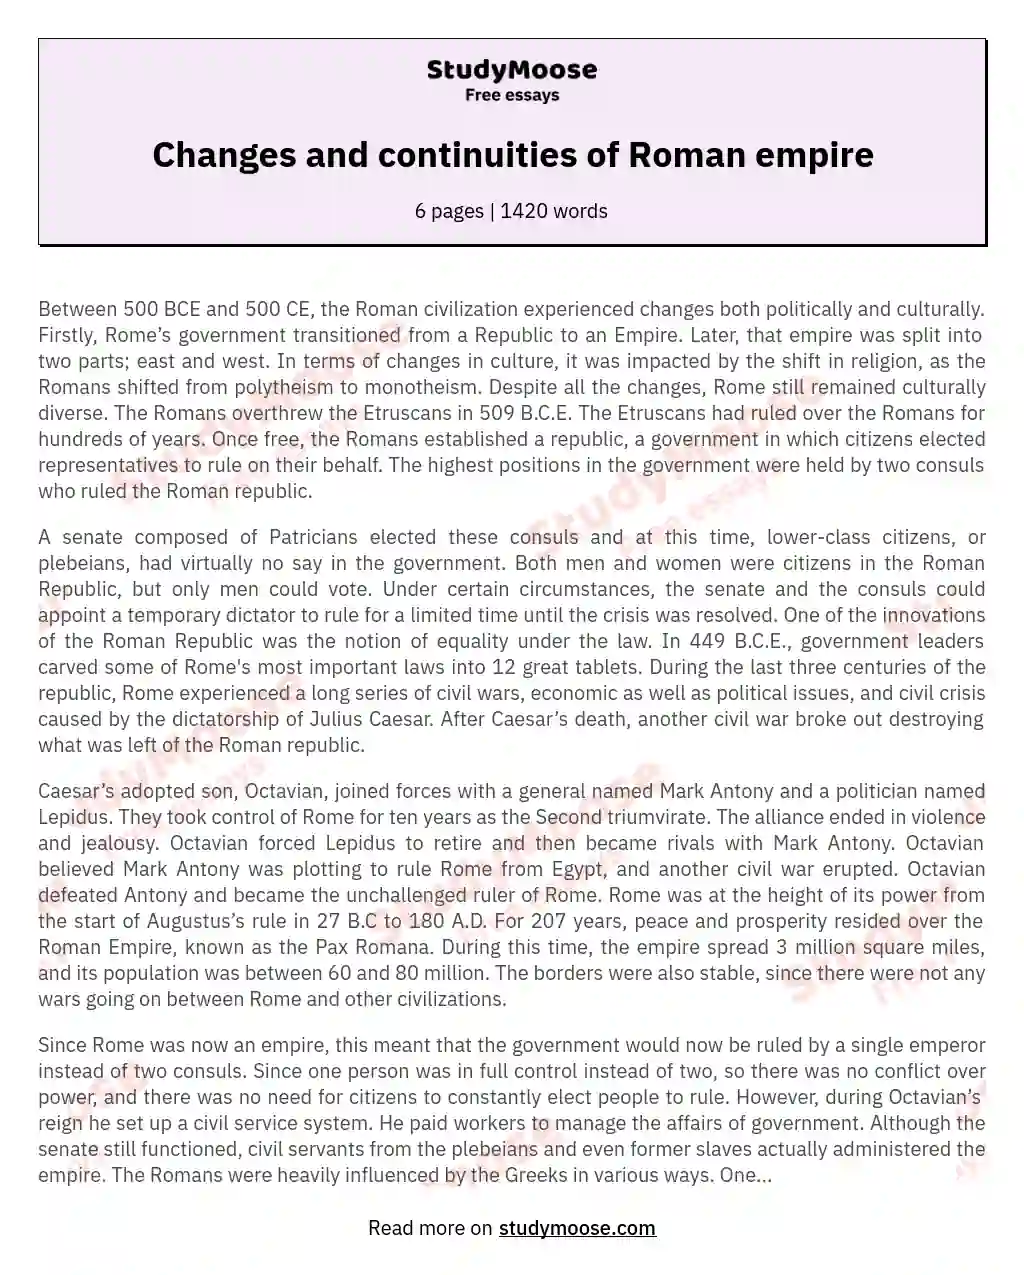 Changes and continuities of Roman empire